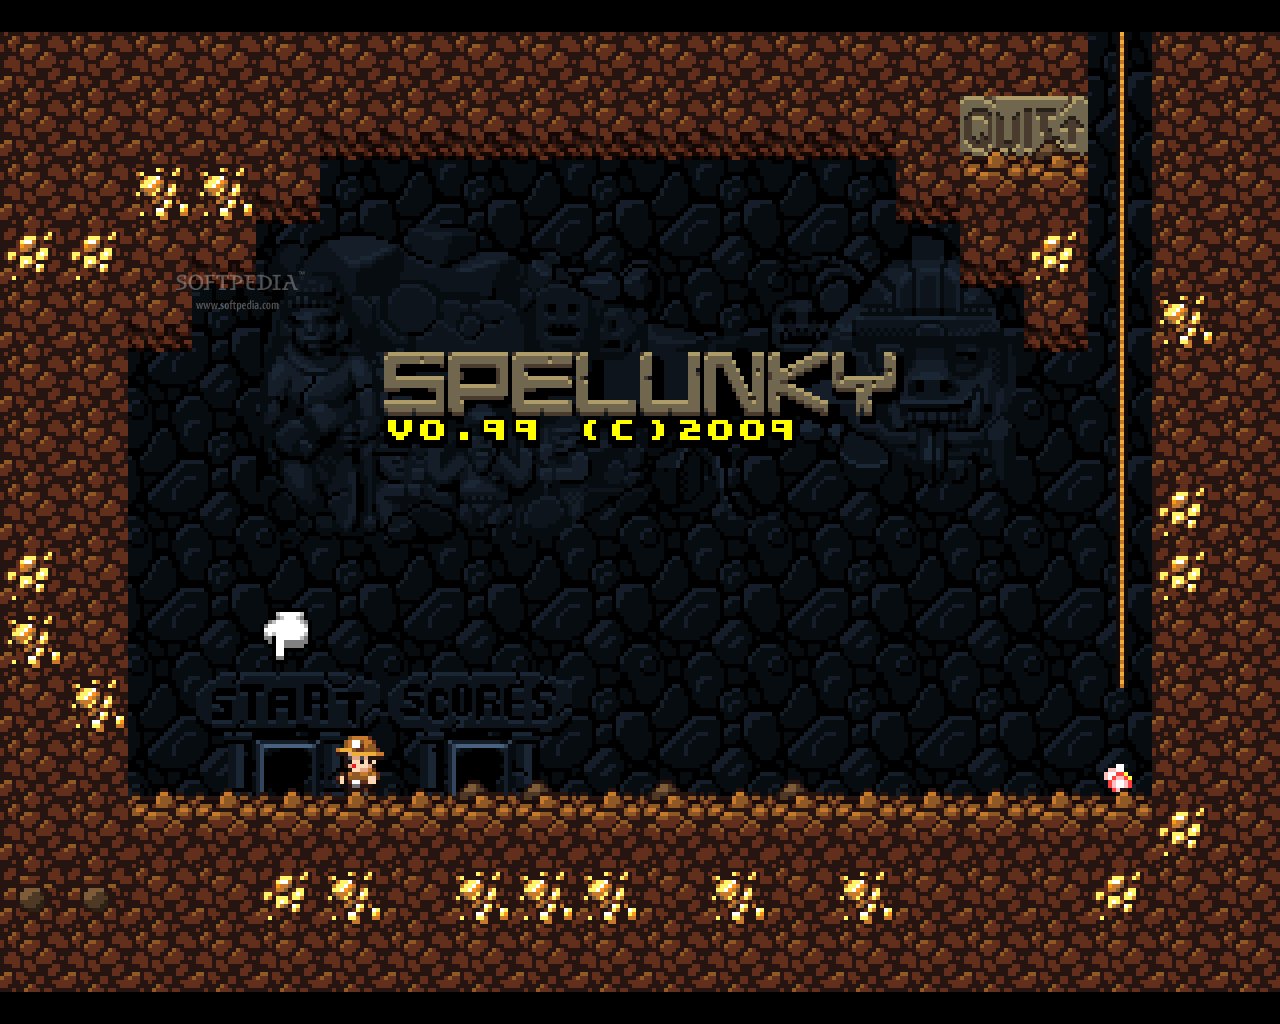 A picture of Spelunky